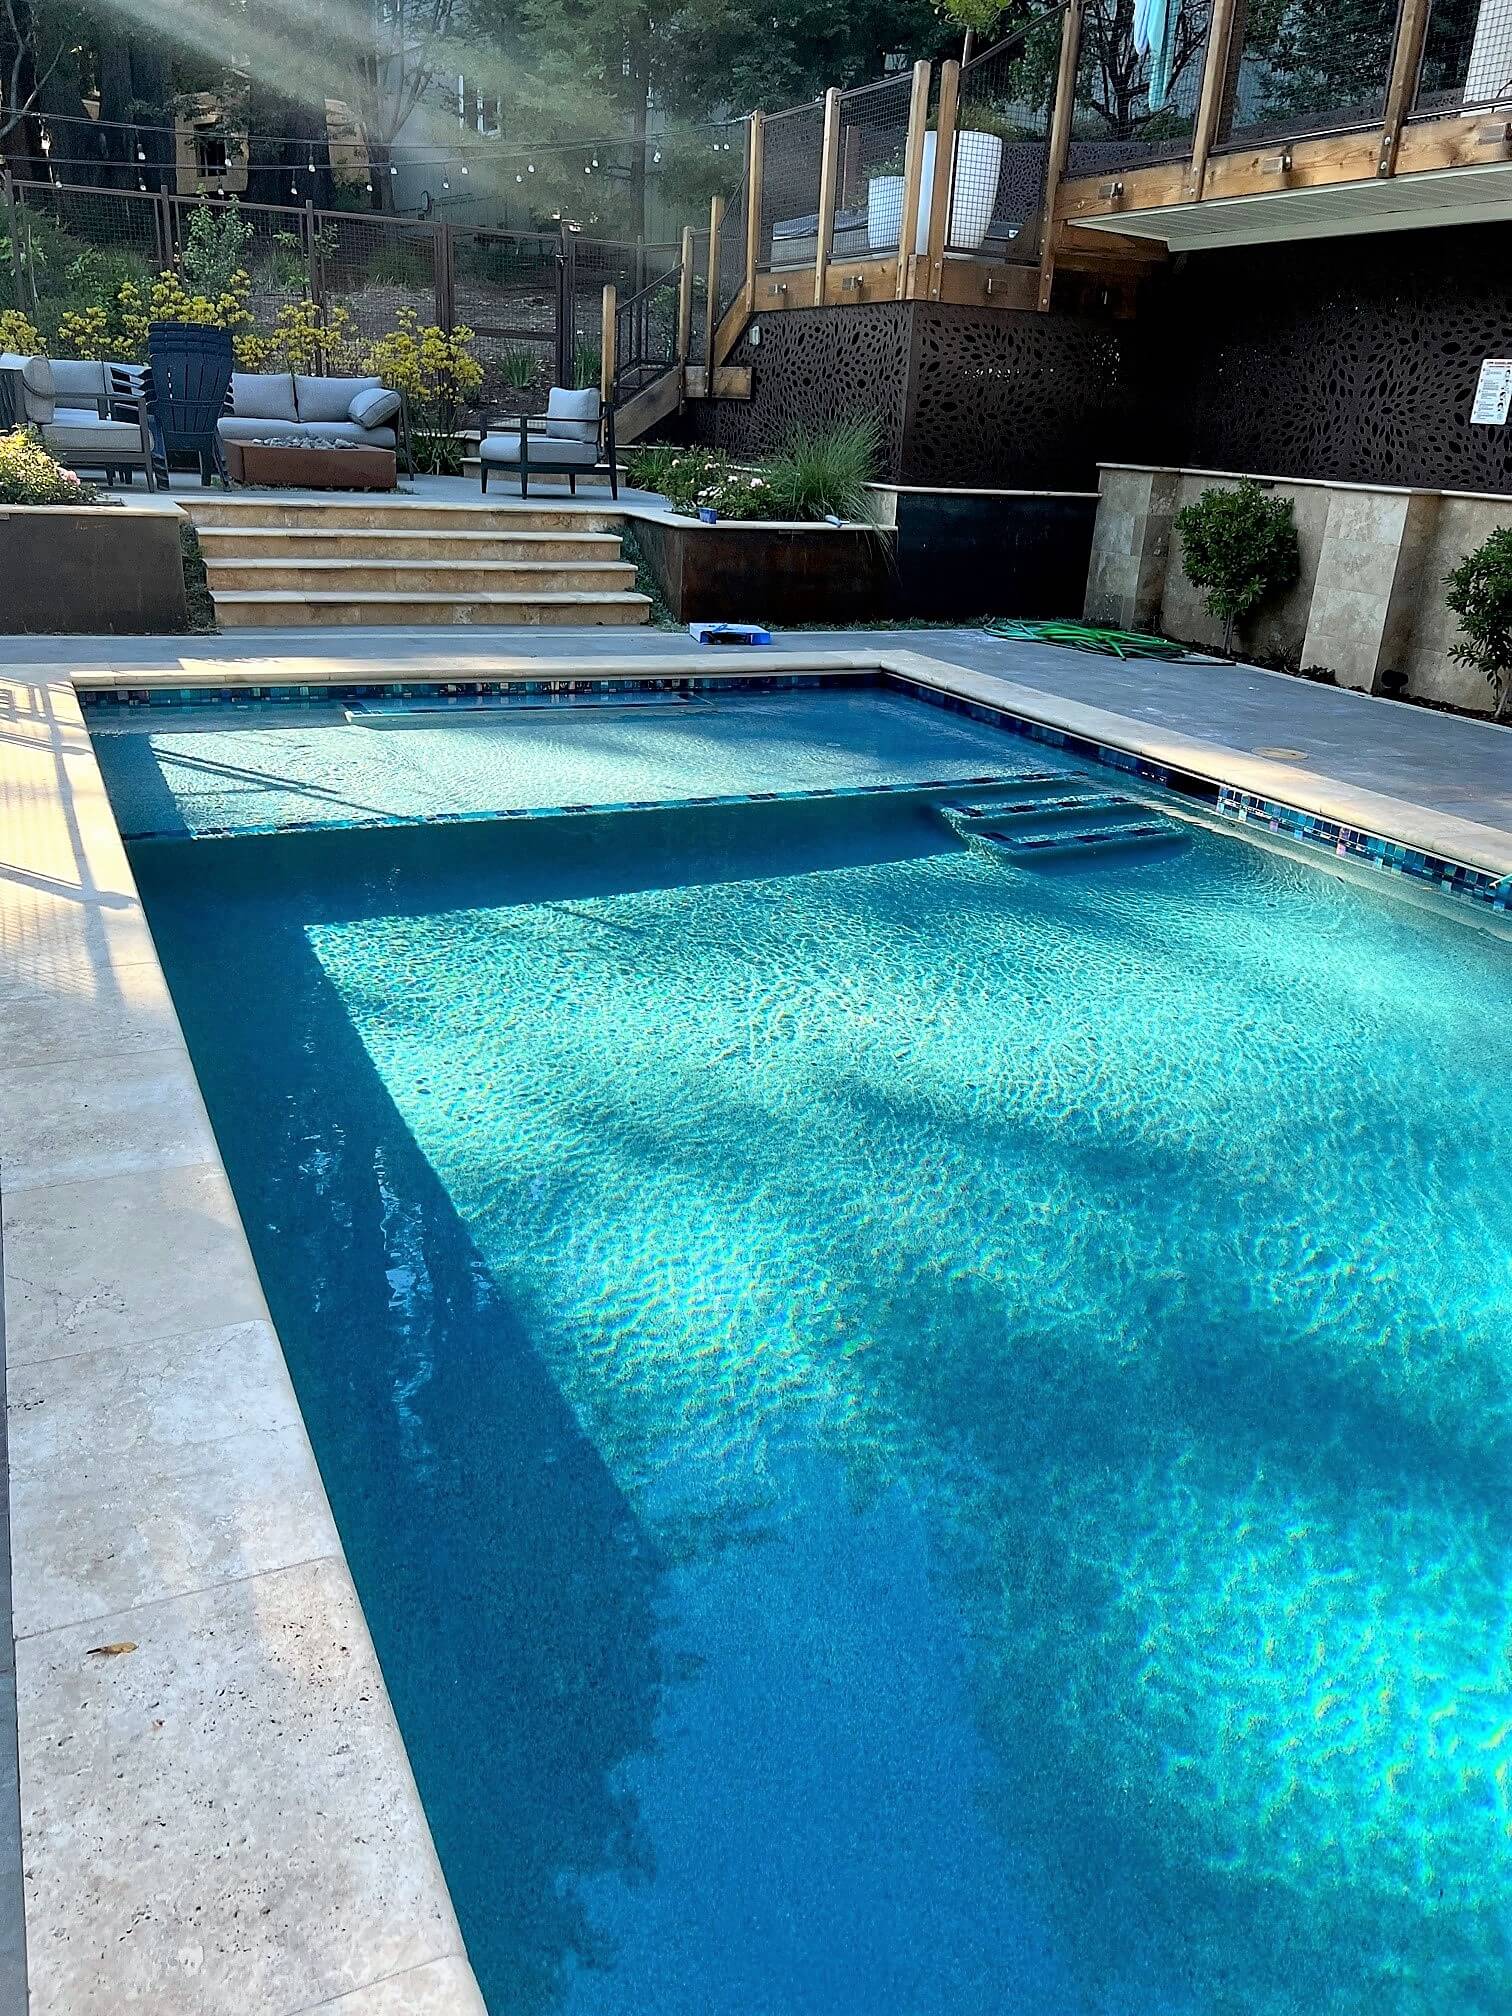 Swimming pool built on a slope in a California bakyard